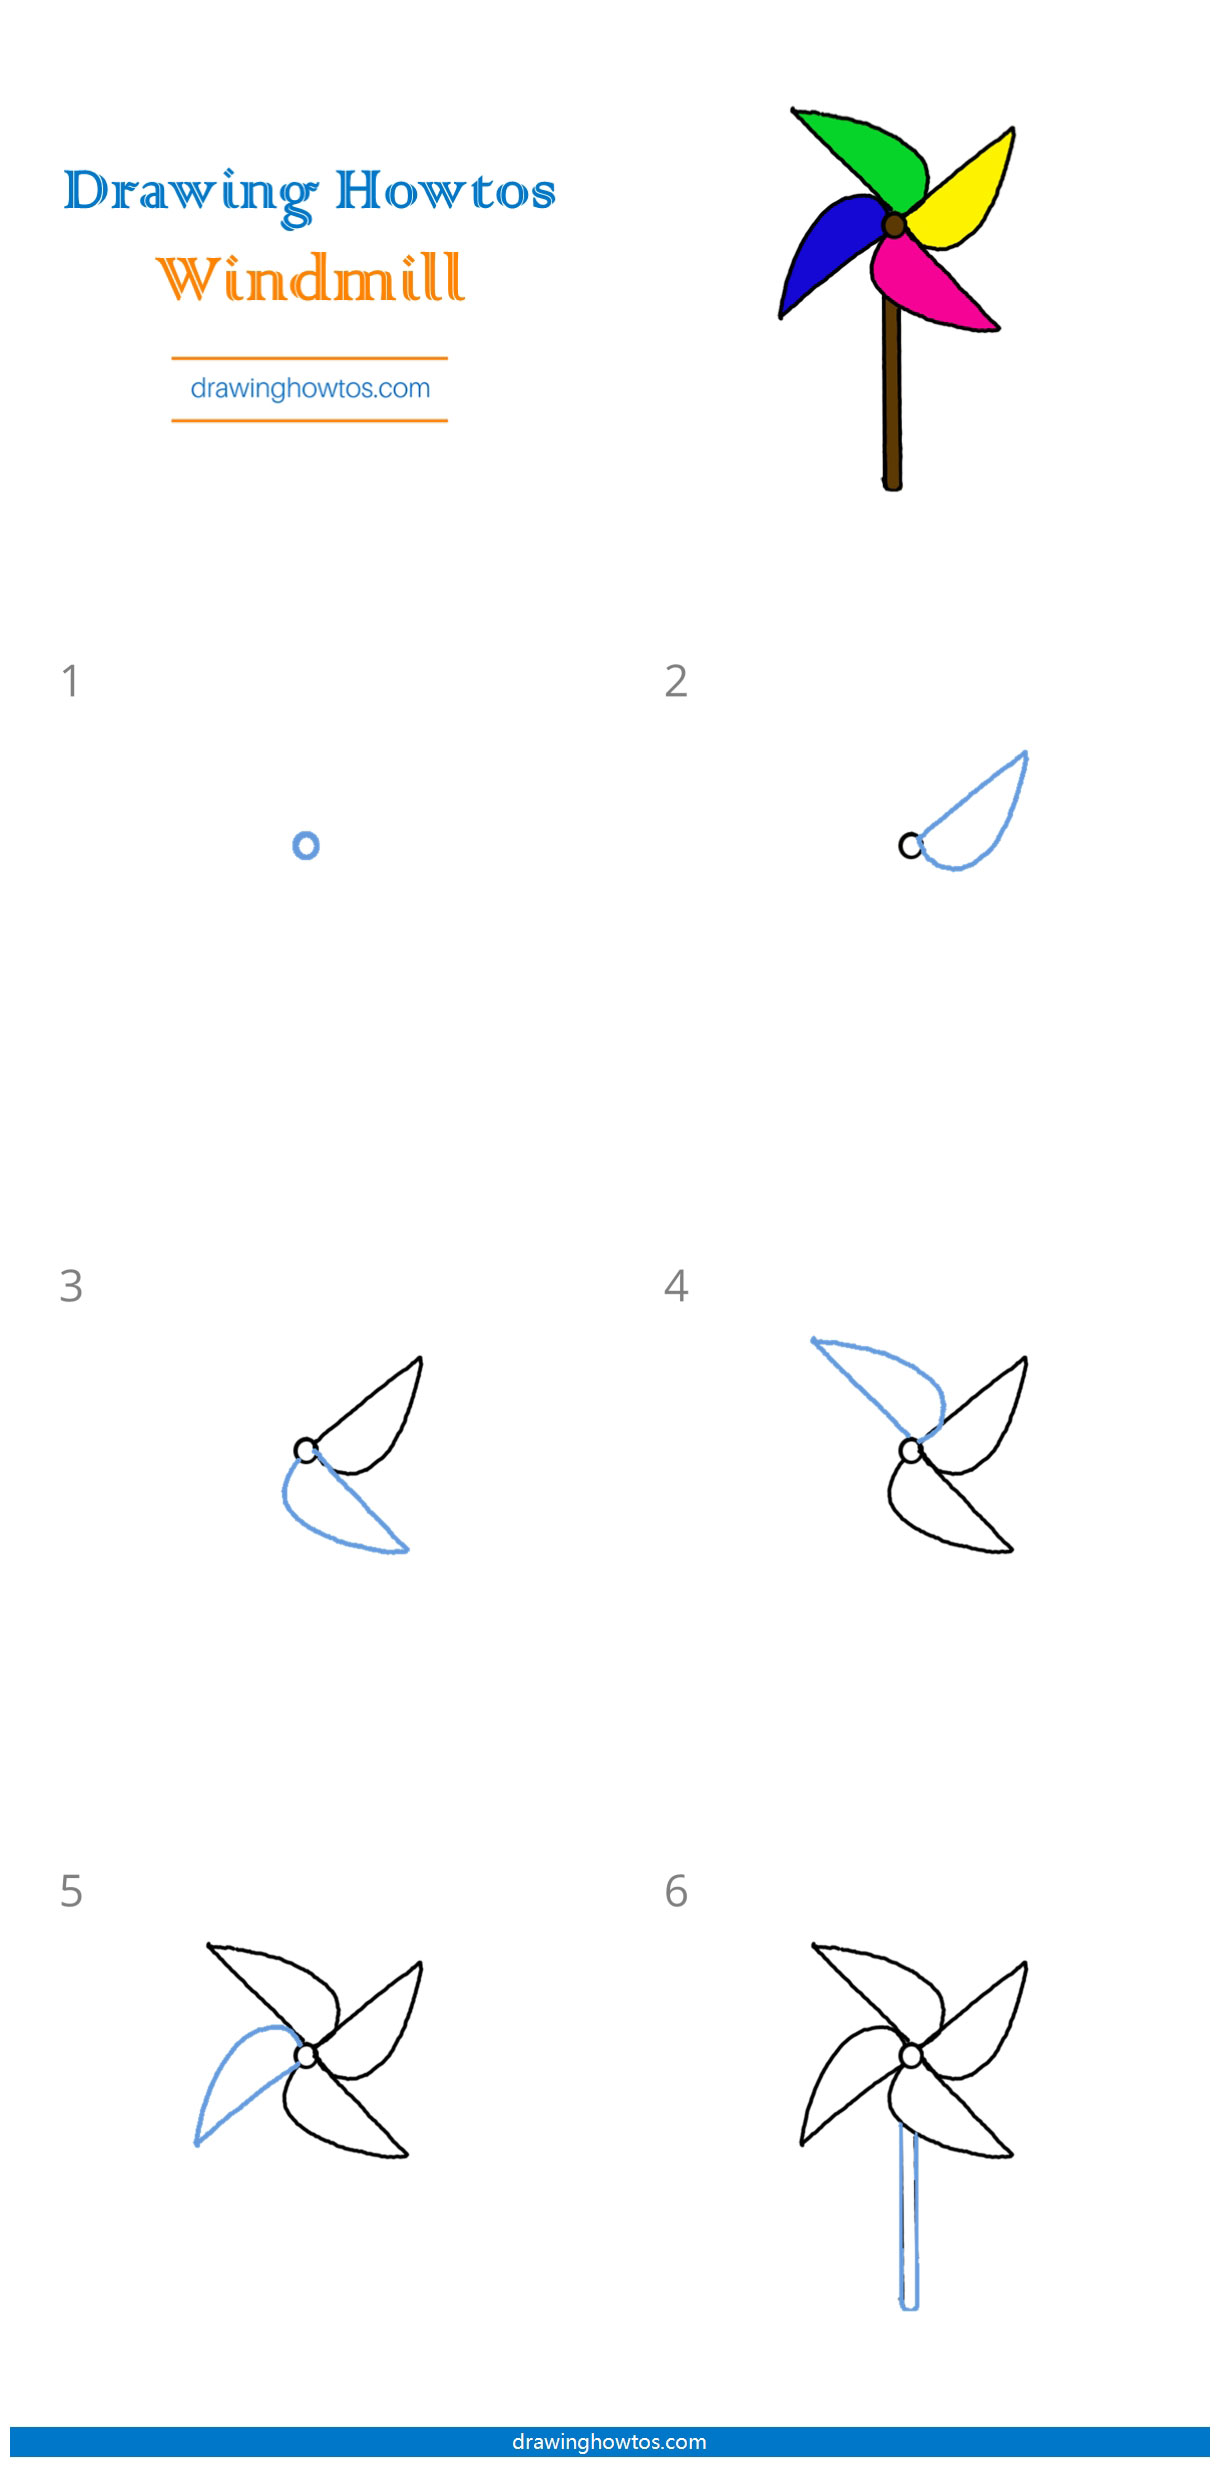 How to Draw a Pinwheel Step by Step